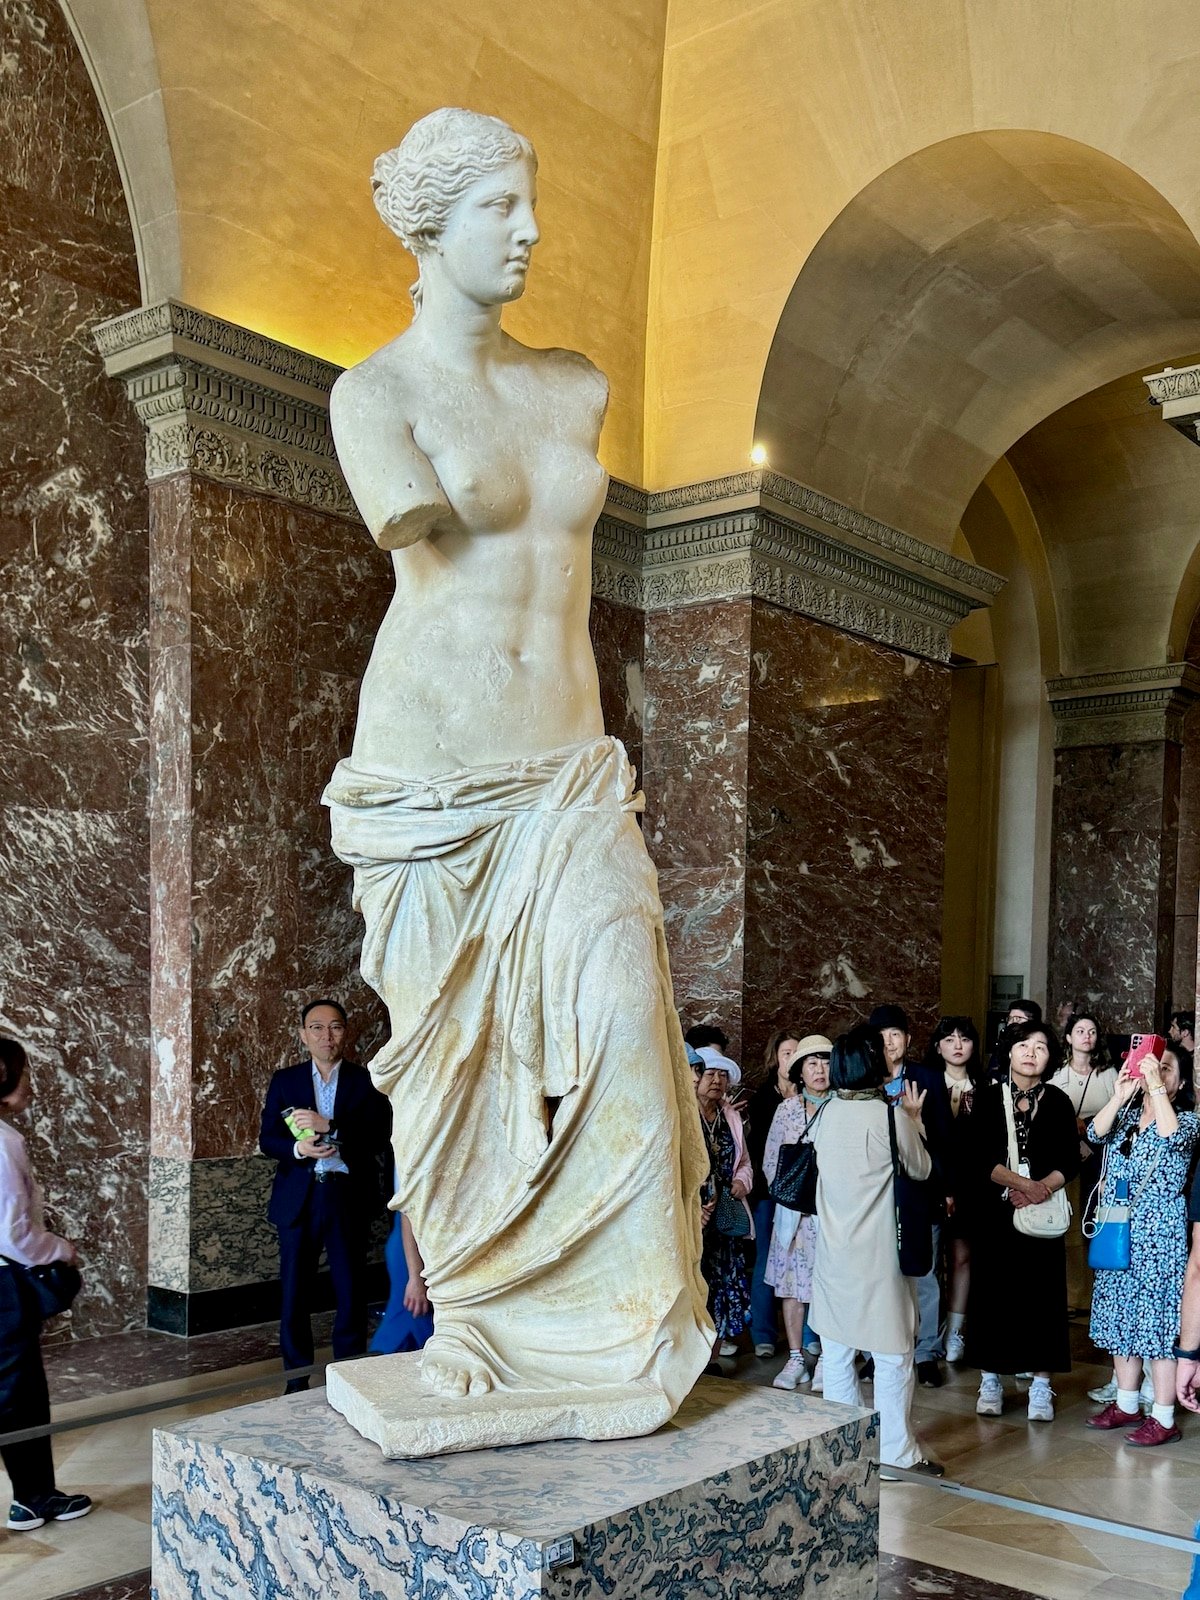 One day in Paris, a crowd observes the armless, ancient Greek statue of Venus de Milo displayed in a museum with marble walls and arched ceilings.